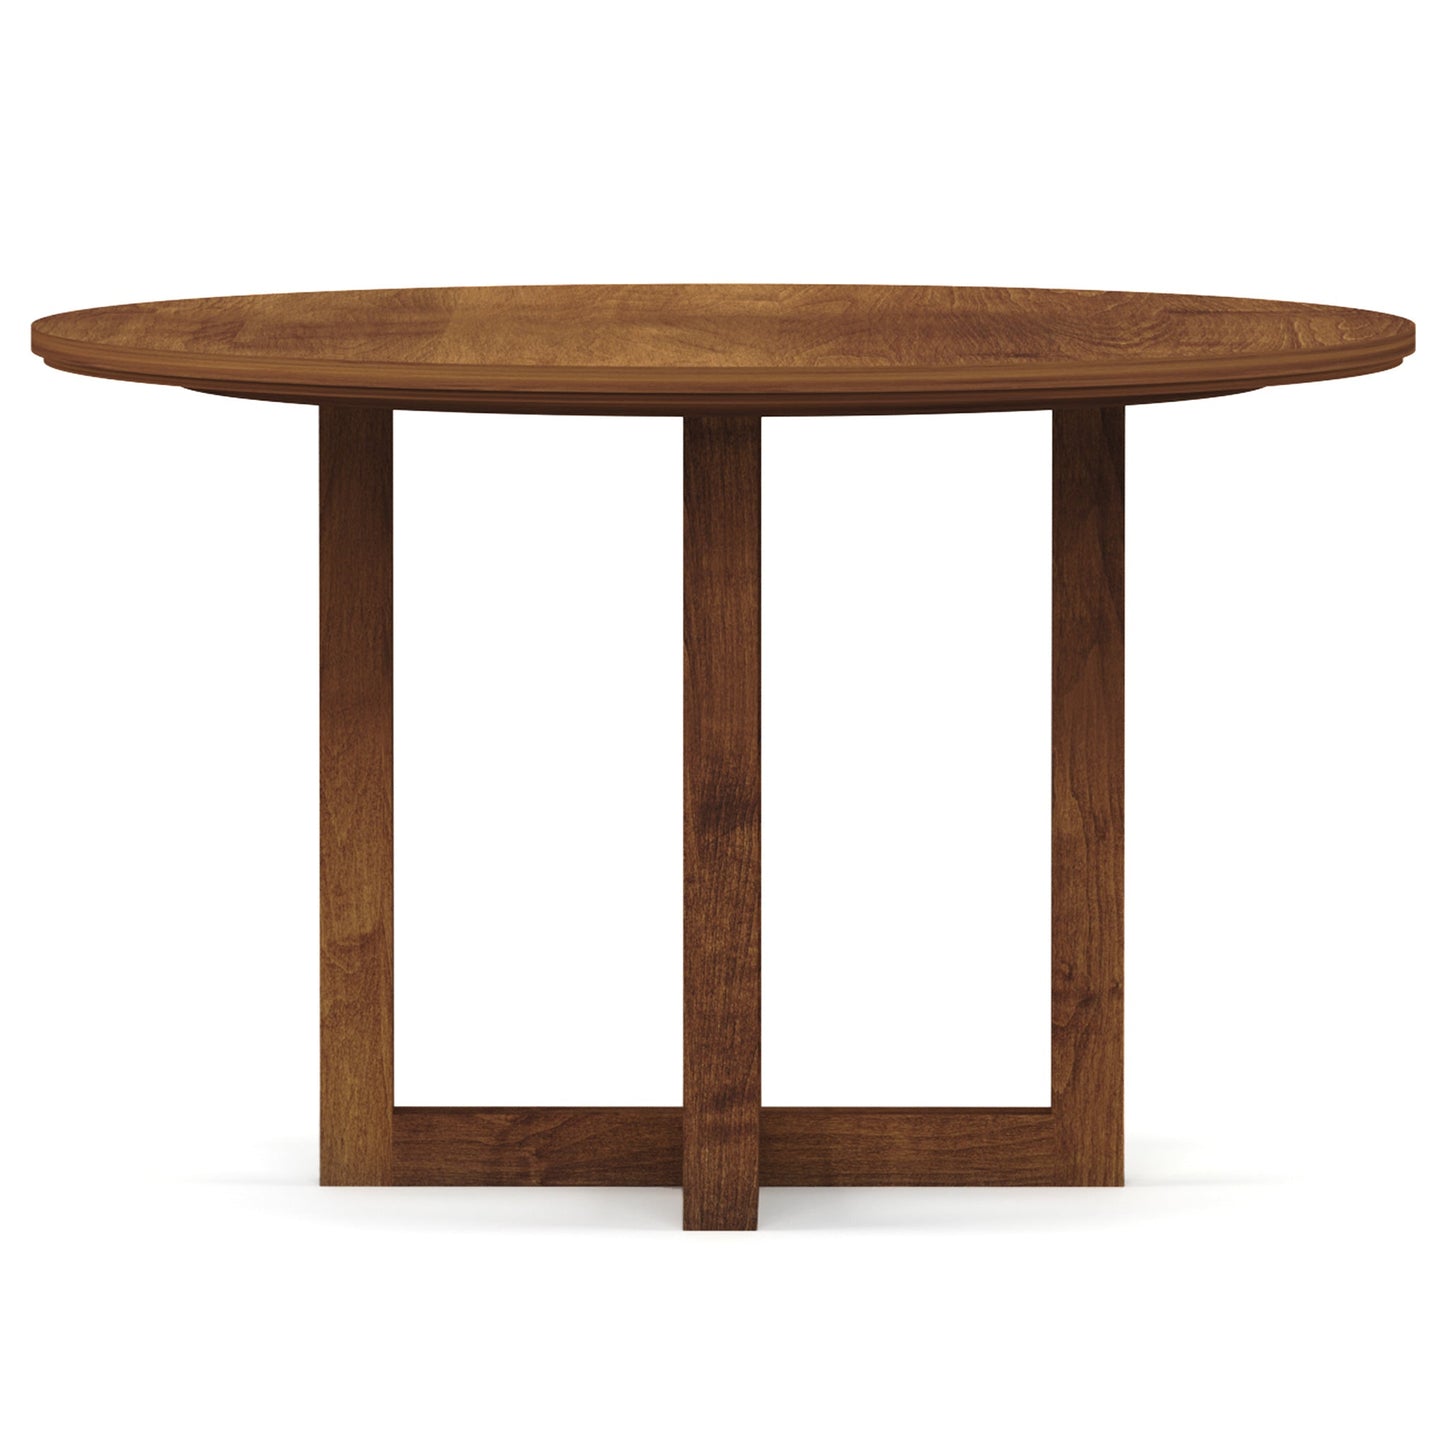 Dwyer 48-inch Round Dining Table